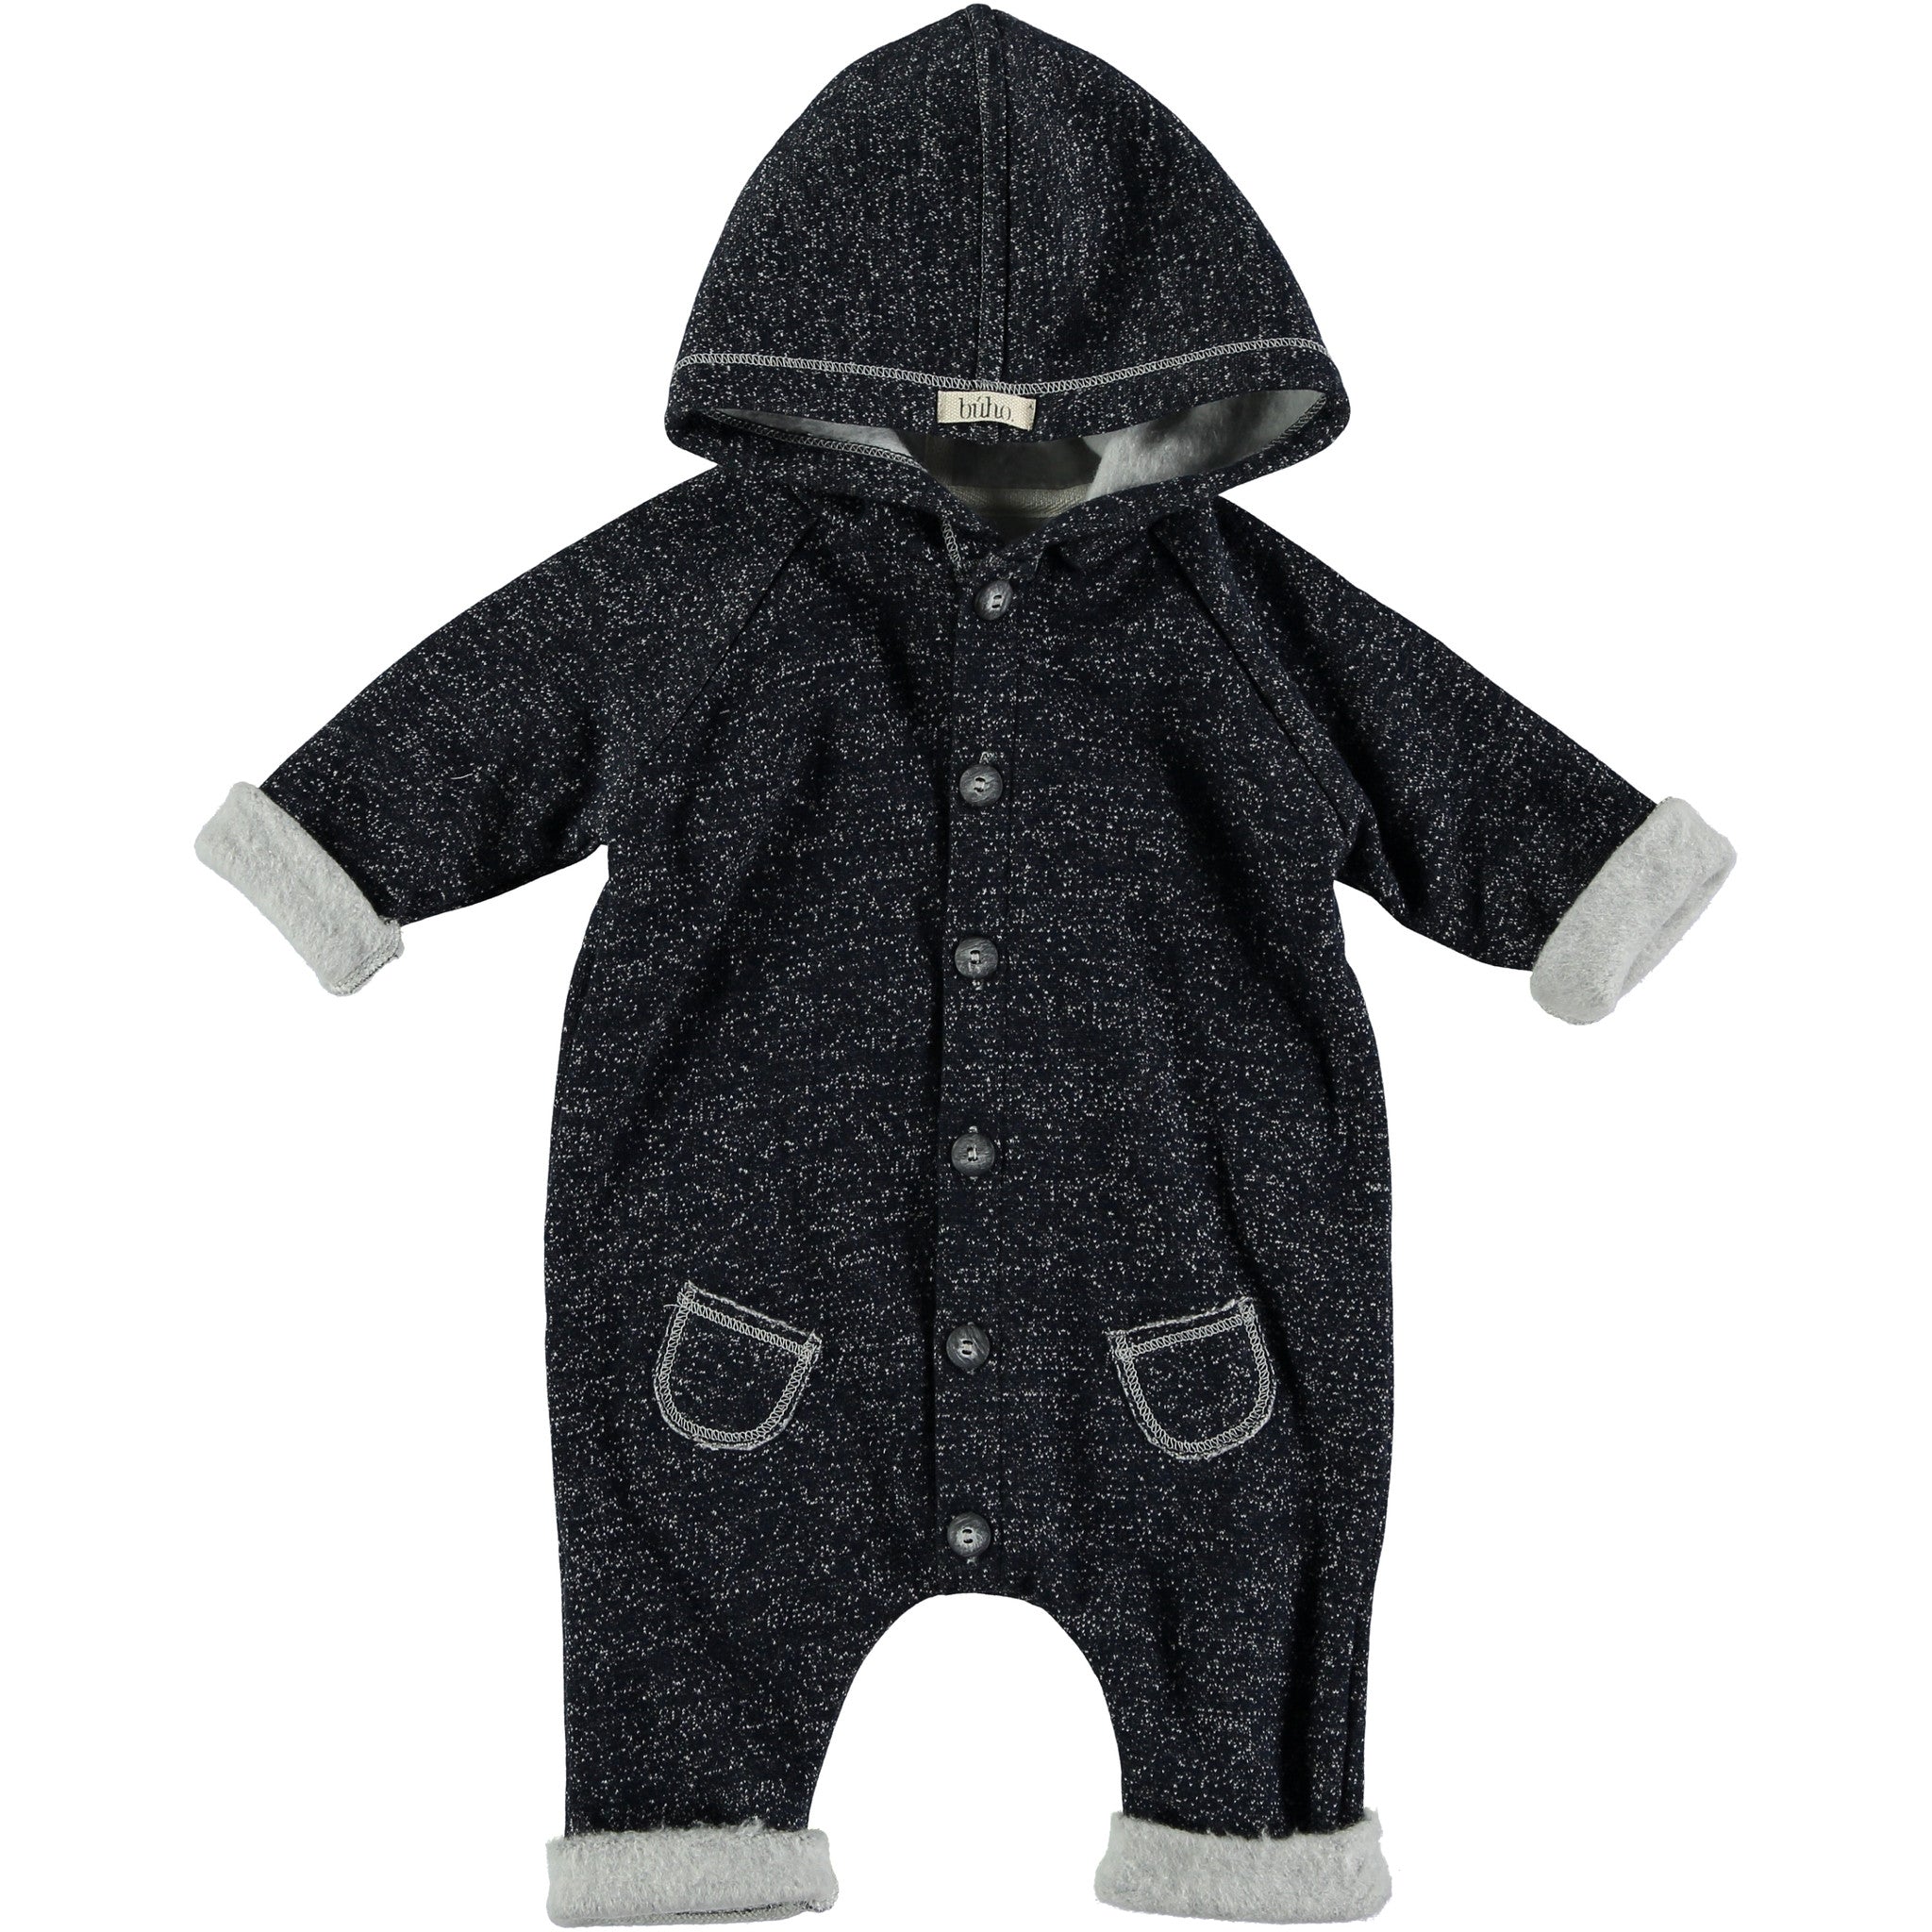 Hoodie jumper by Buho at Bonjour Baby Baskets